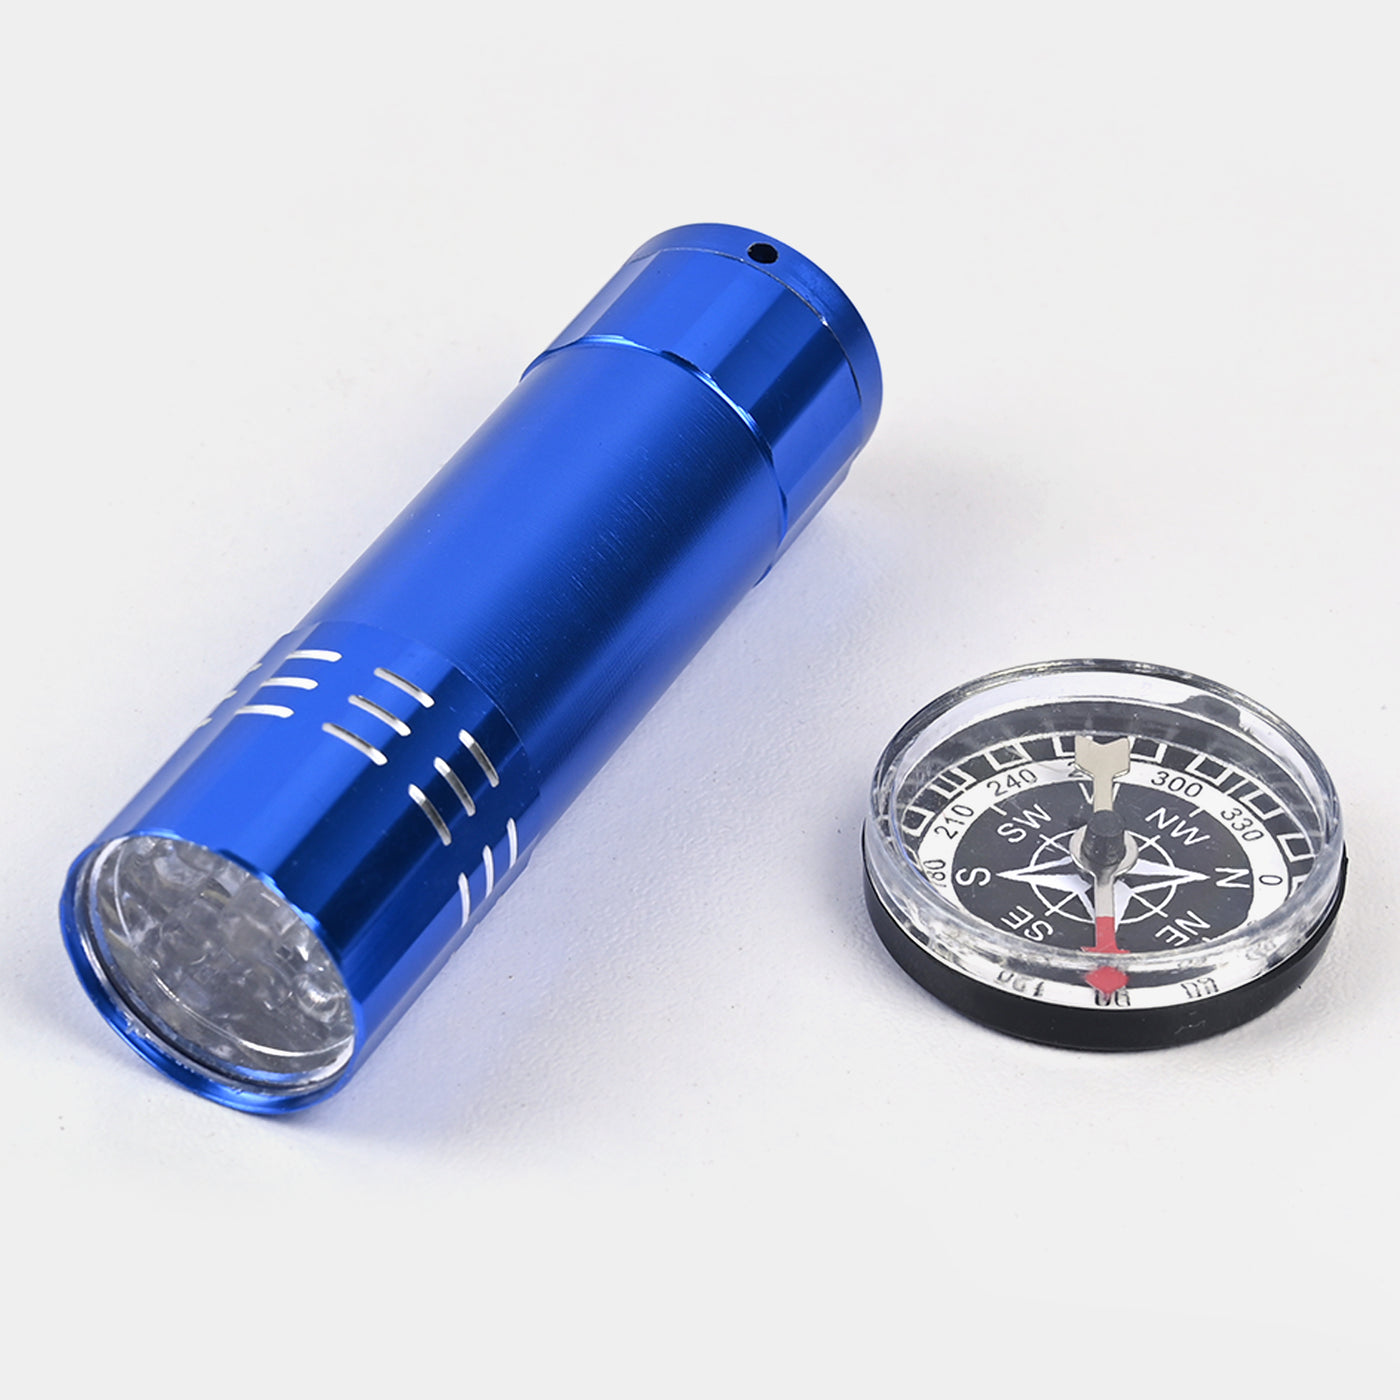 Torch + Compass For Kids